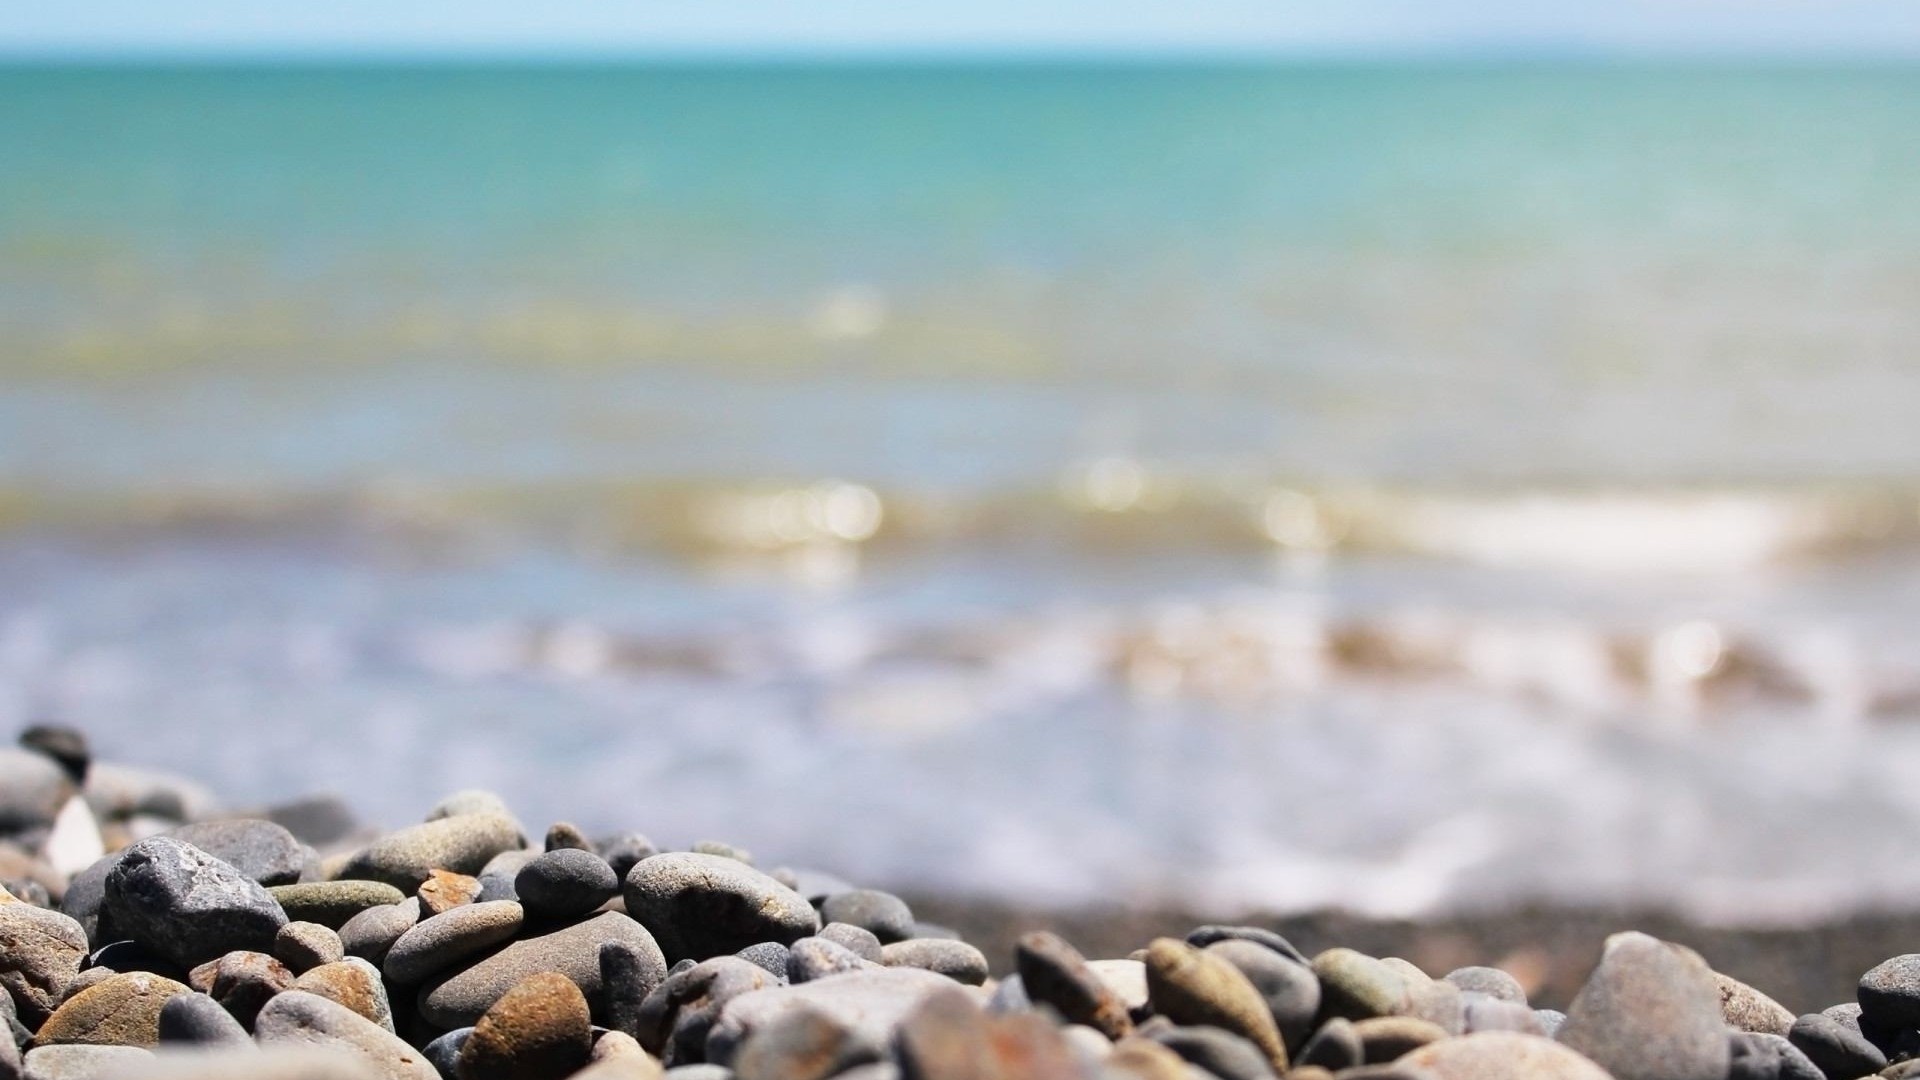 1920x1080 wallpapers: stones, shore, beach, day, fine photo (image)